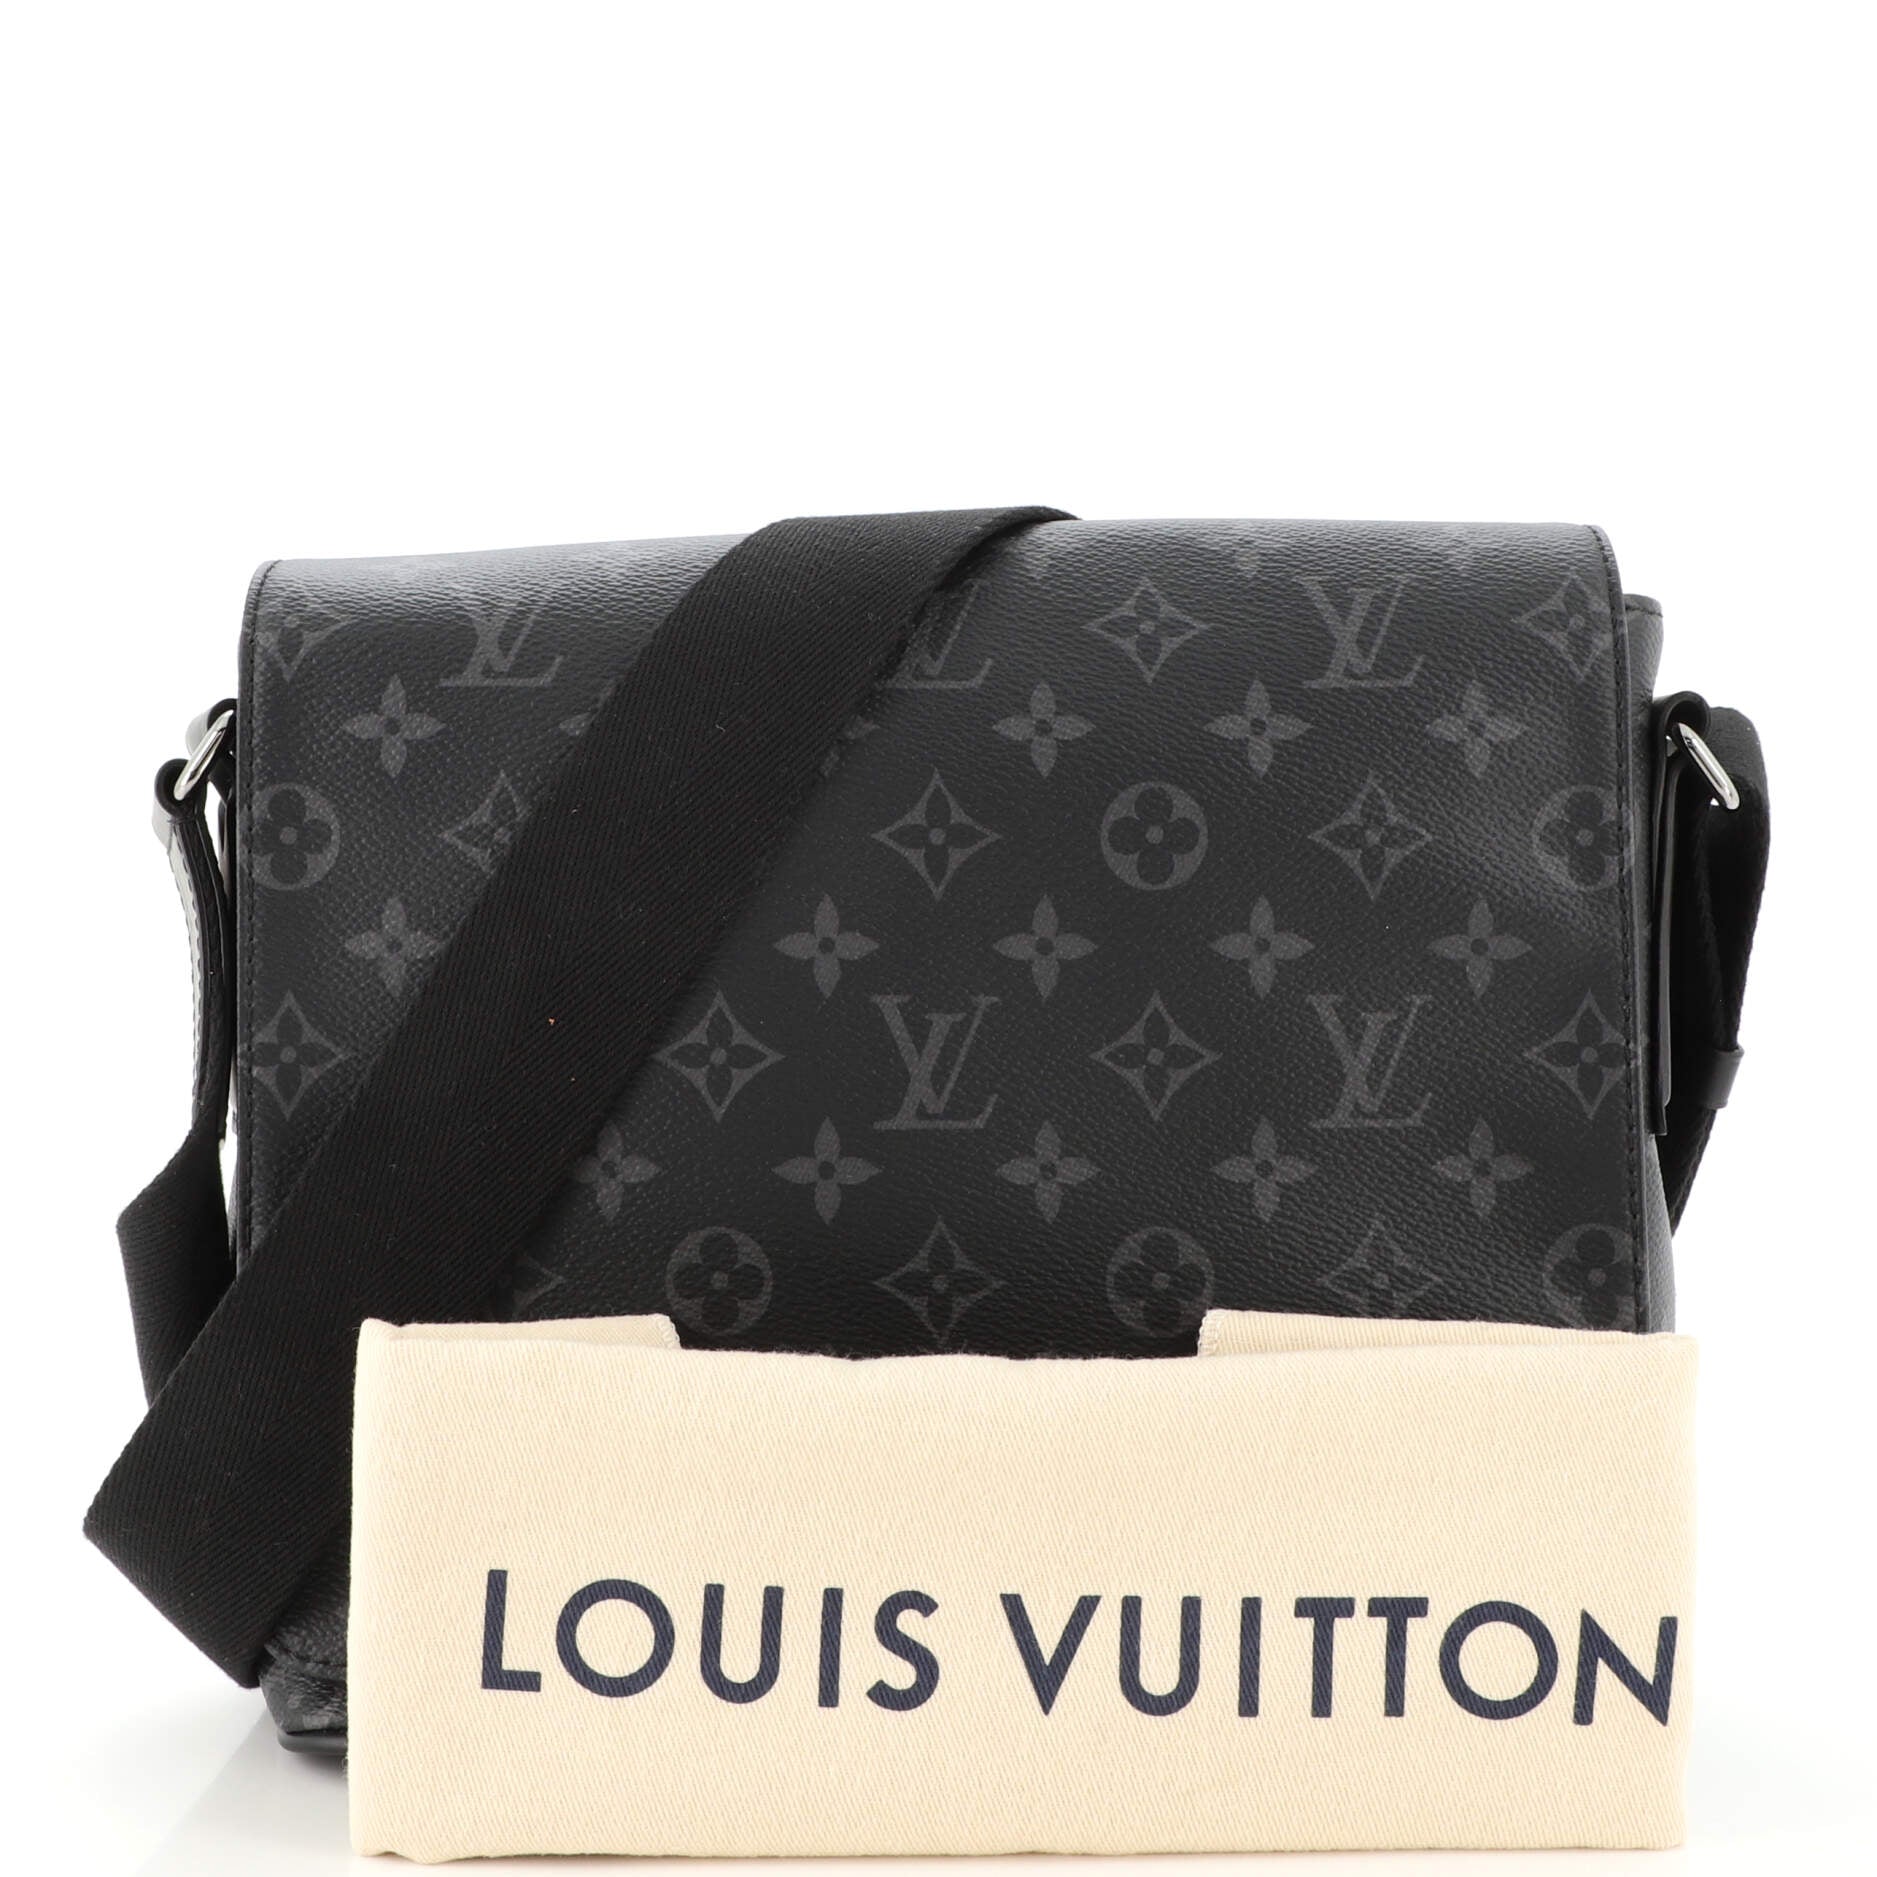 Pre-owned Louis Vuitton 2017 Damier Graphite District Nm Pm In